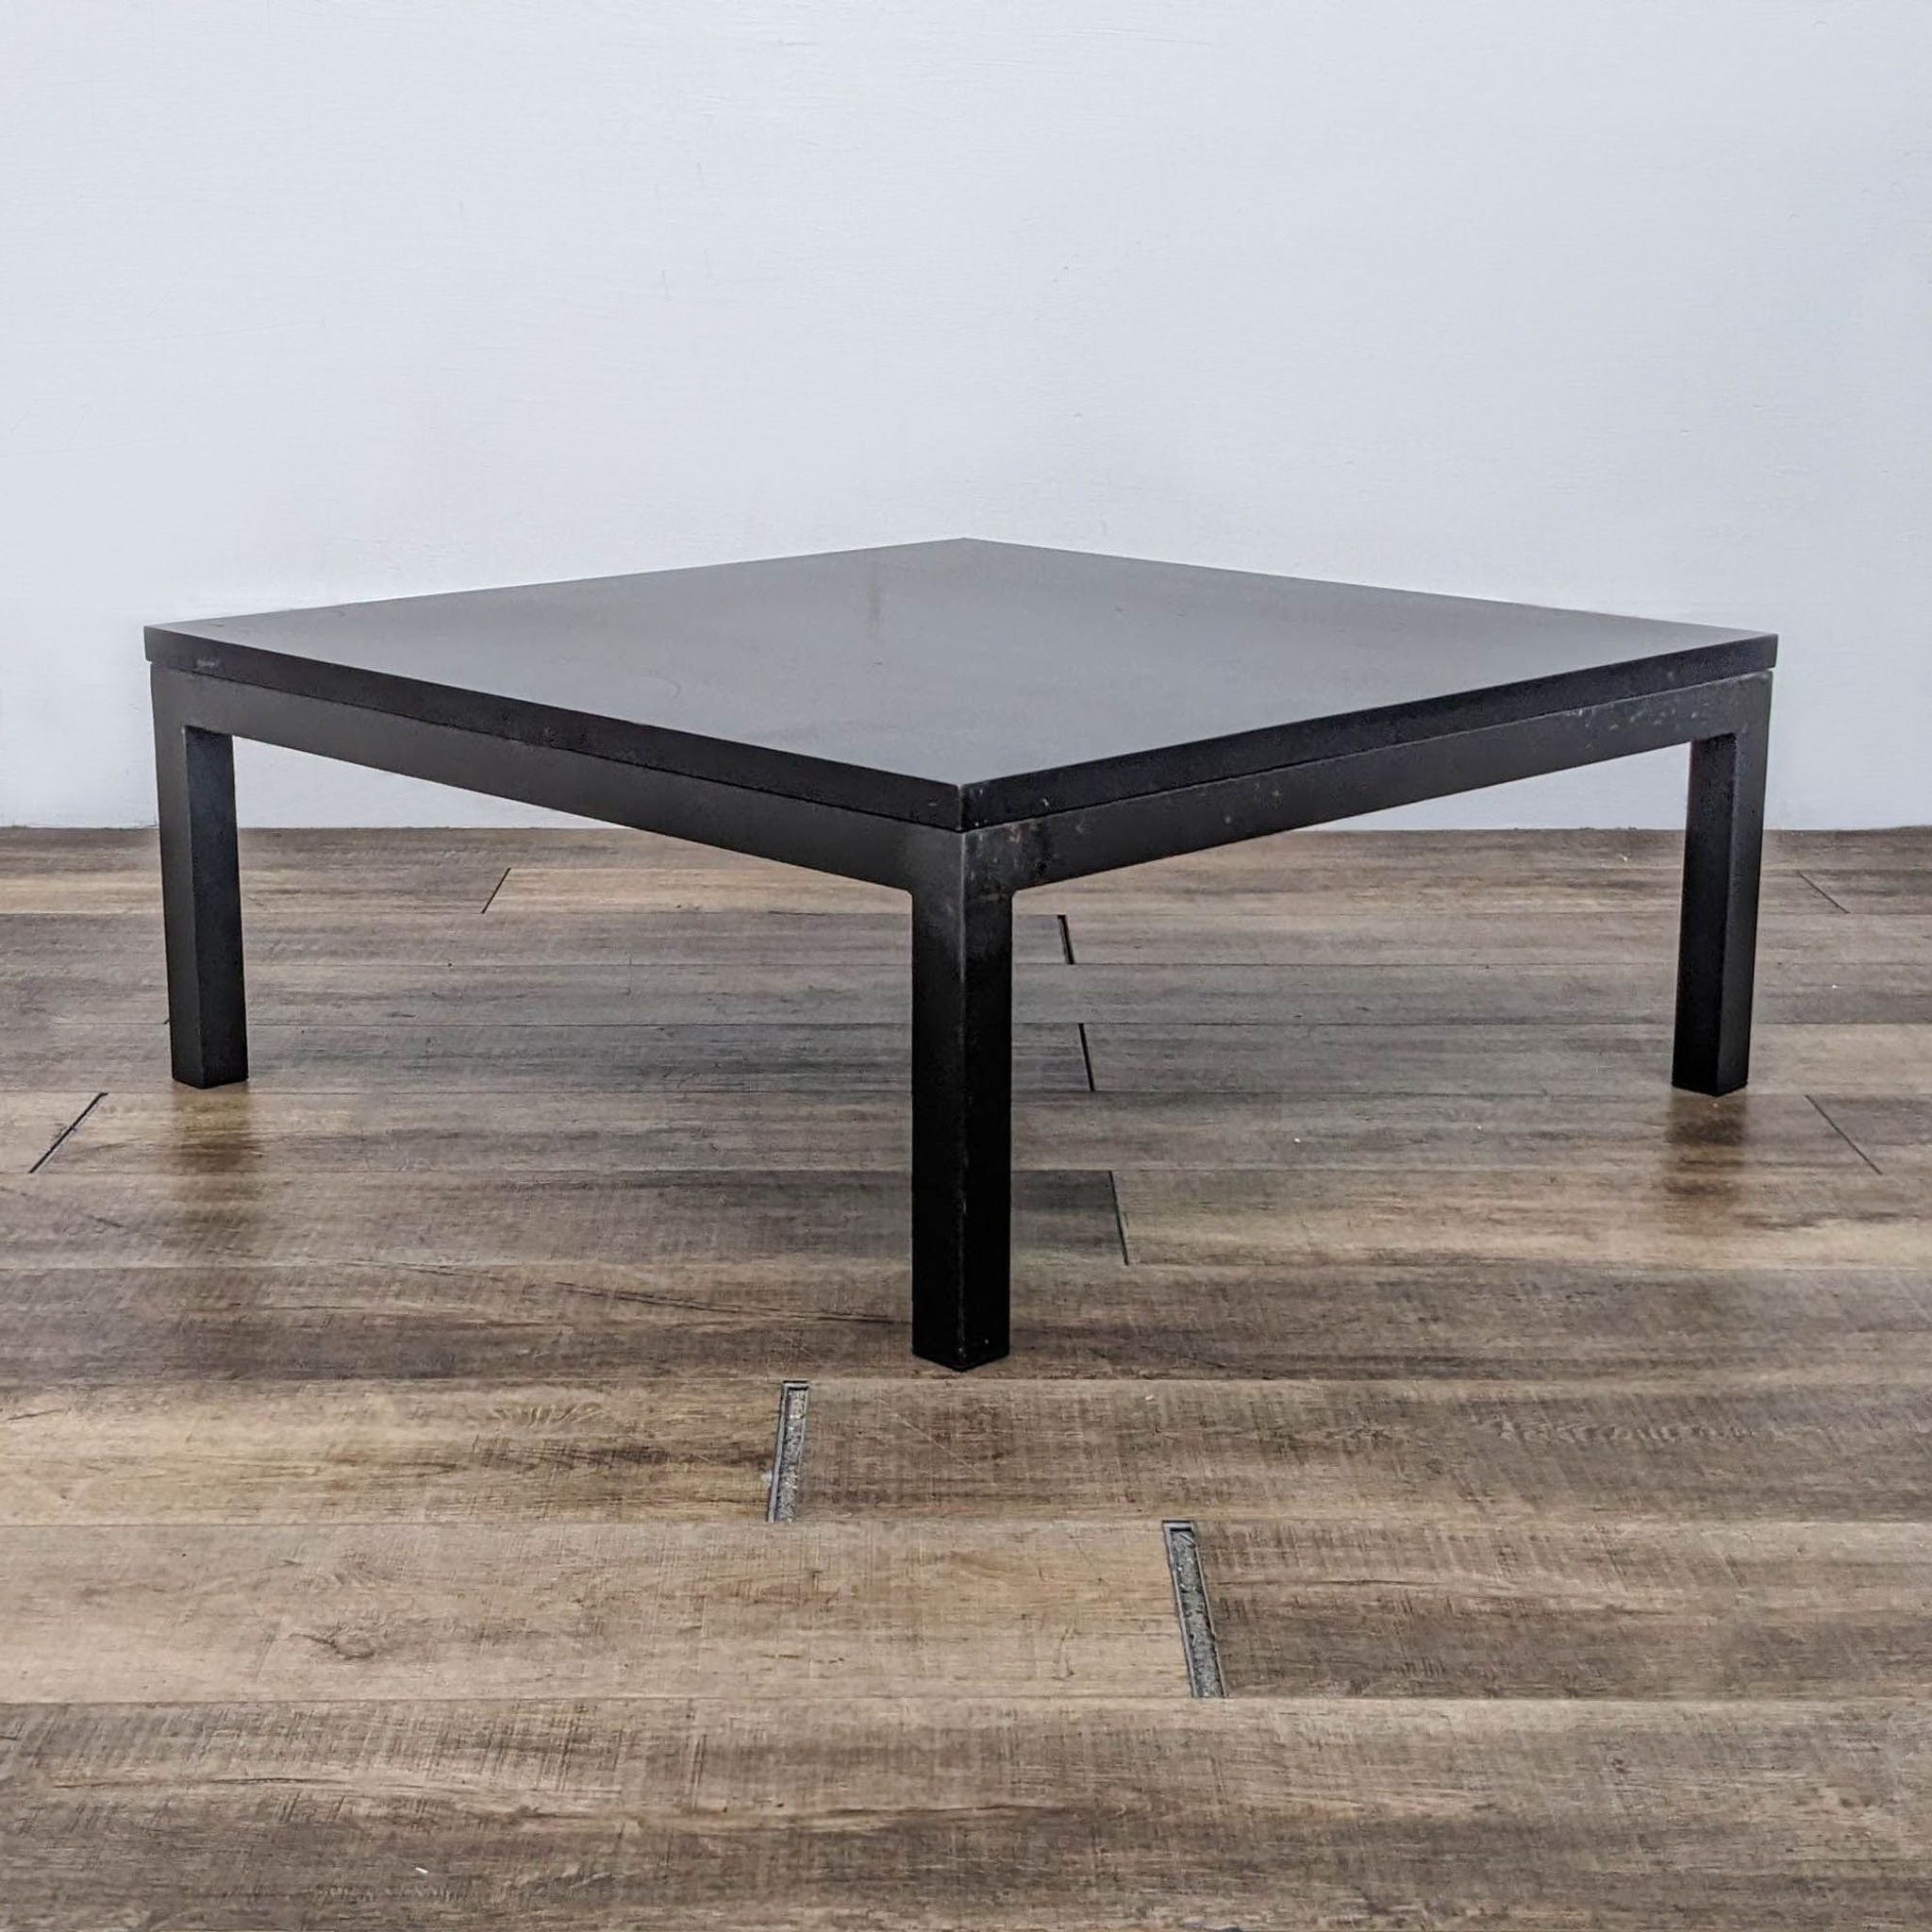 Room & Board Parsons style black coffee table on a wooden floor.